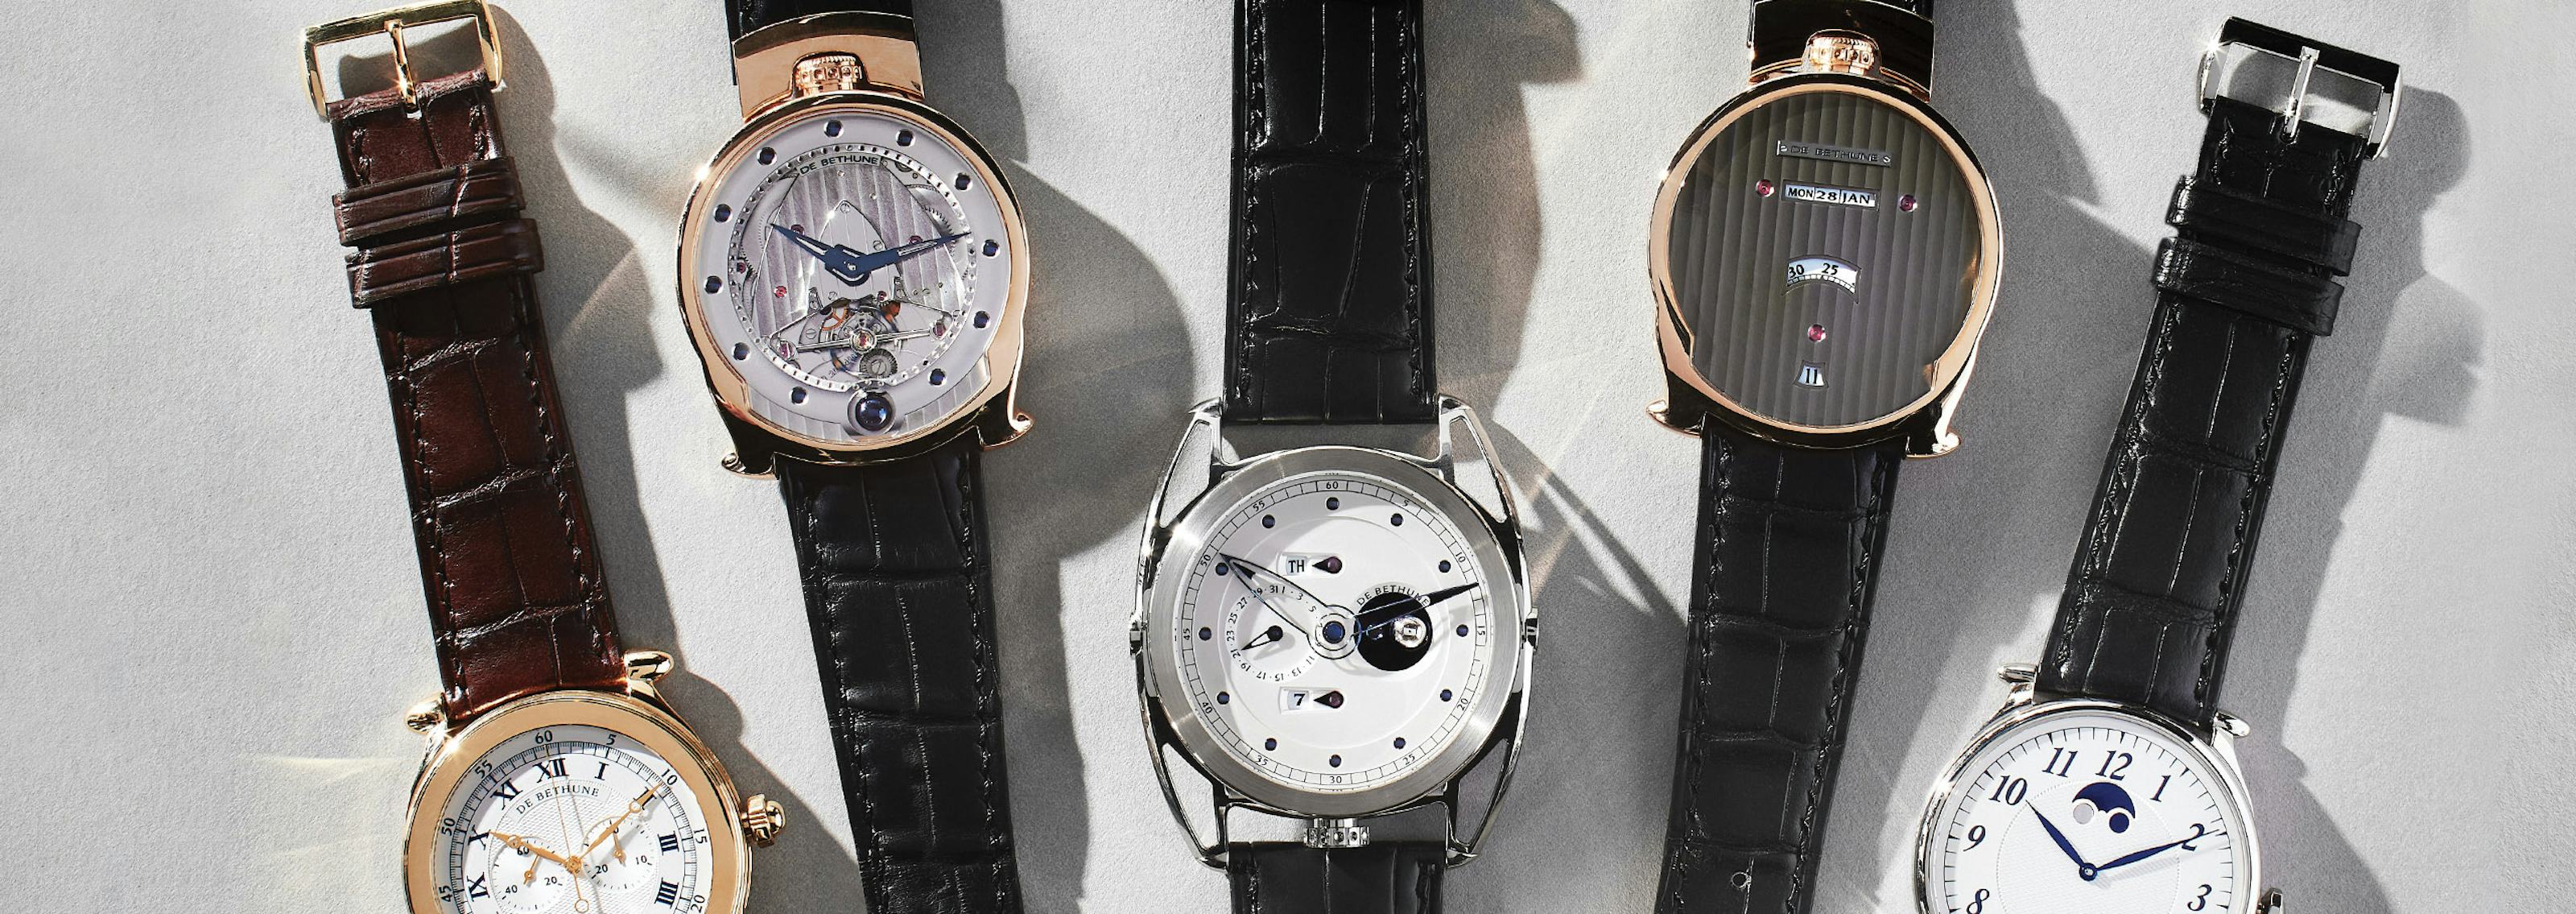 Design At DeBethune: Two Decades Of Evolution And Revolution